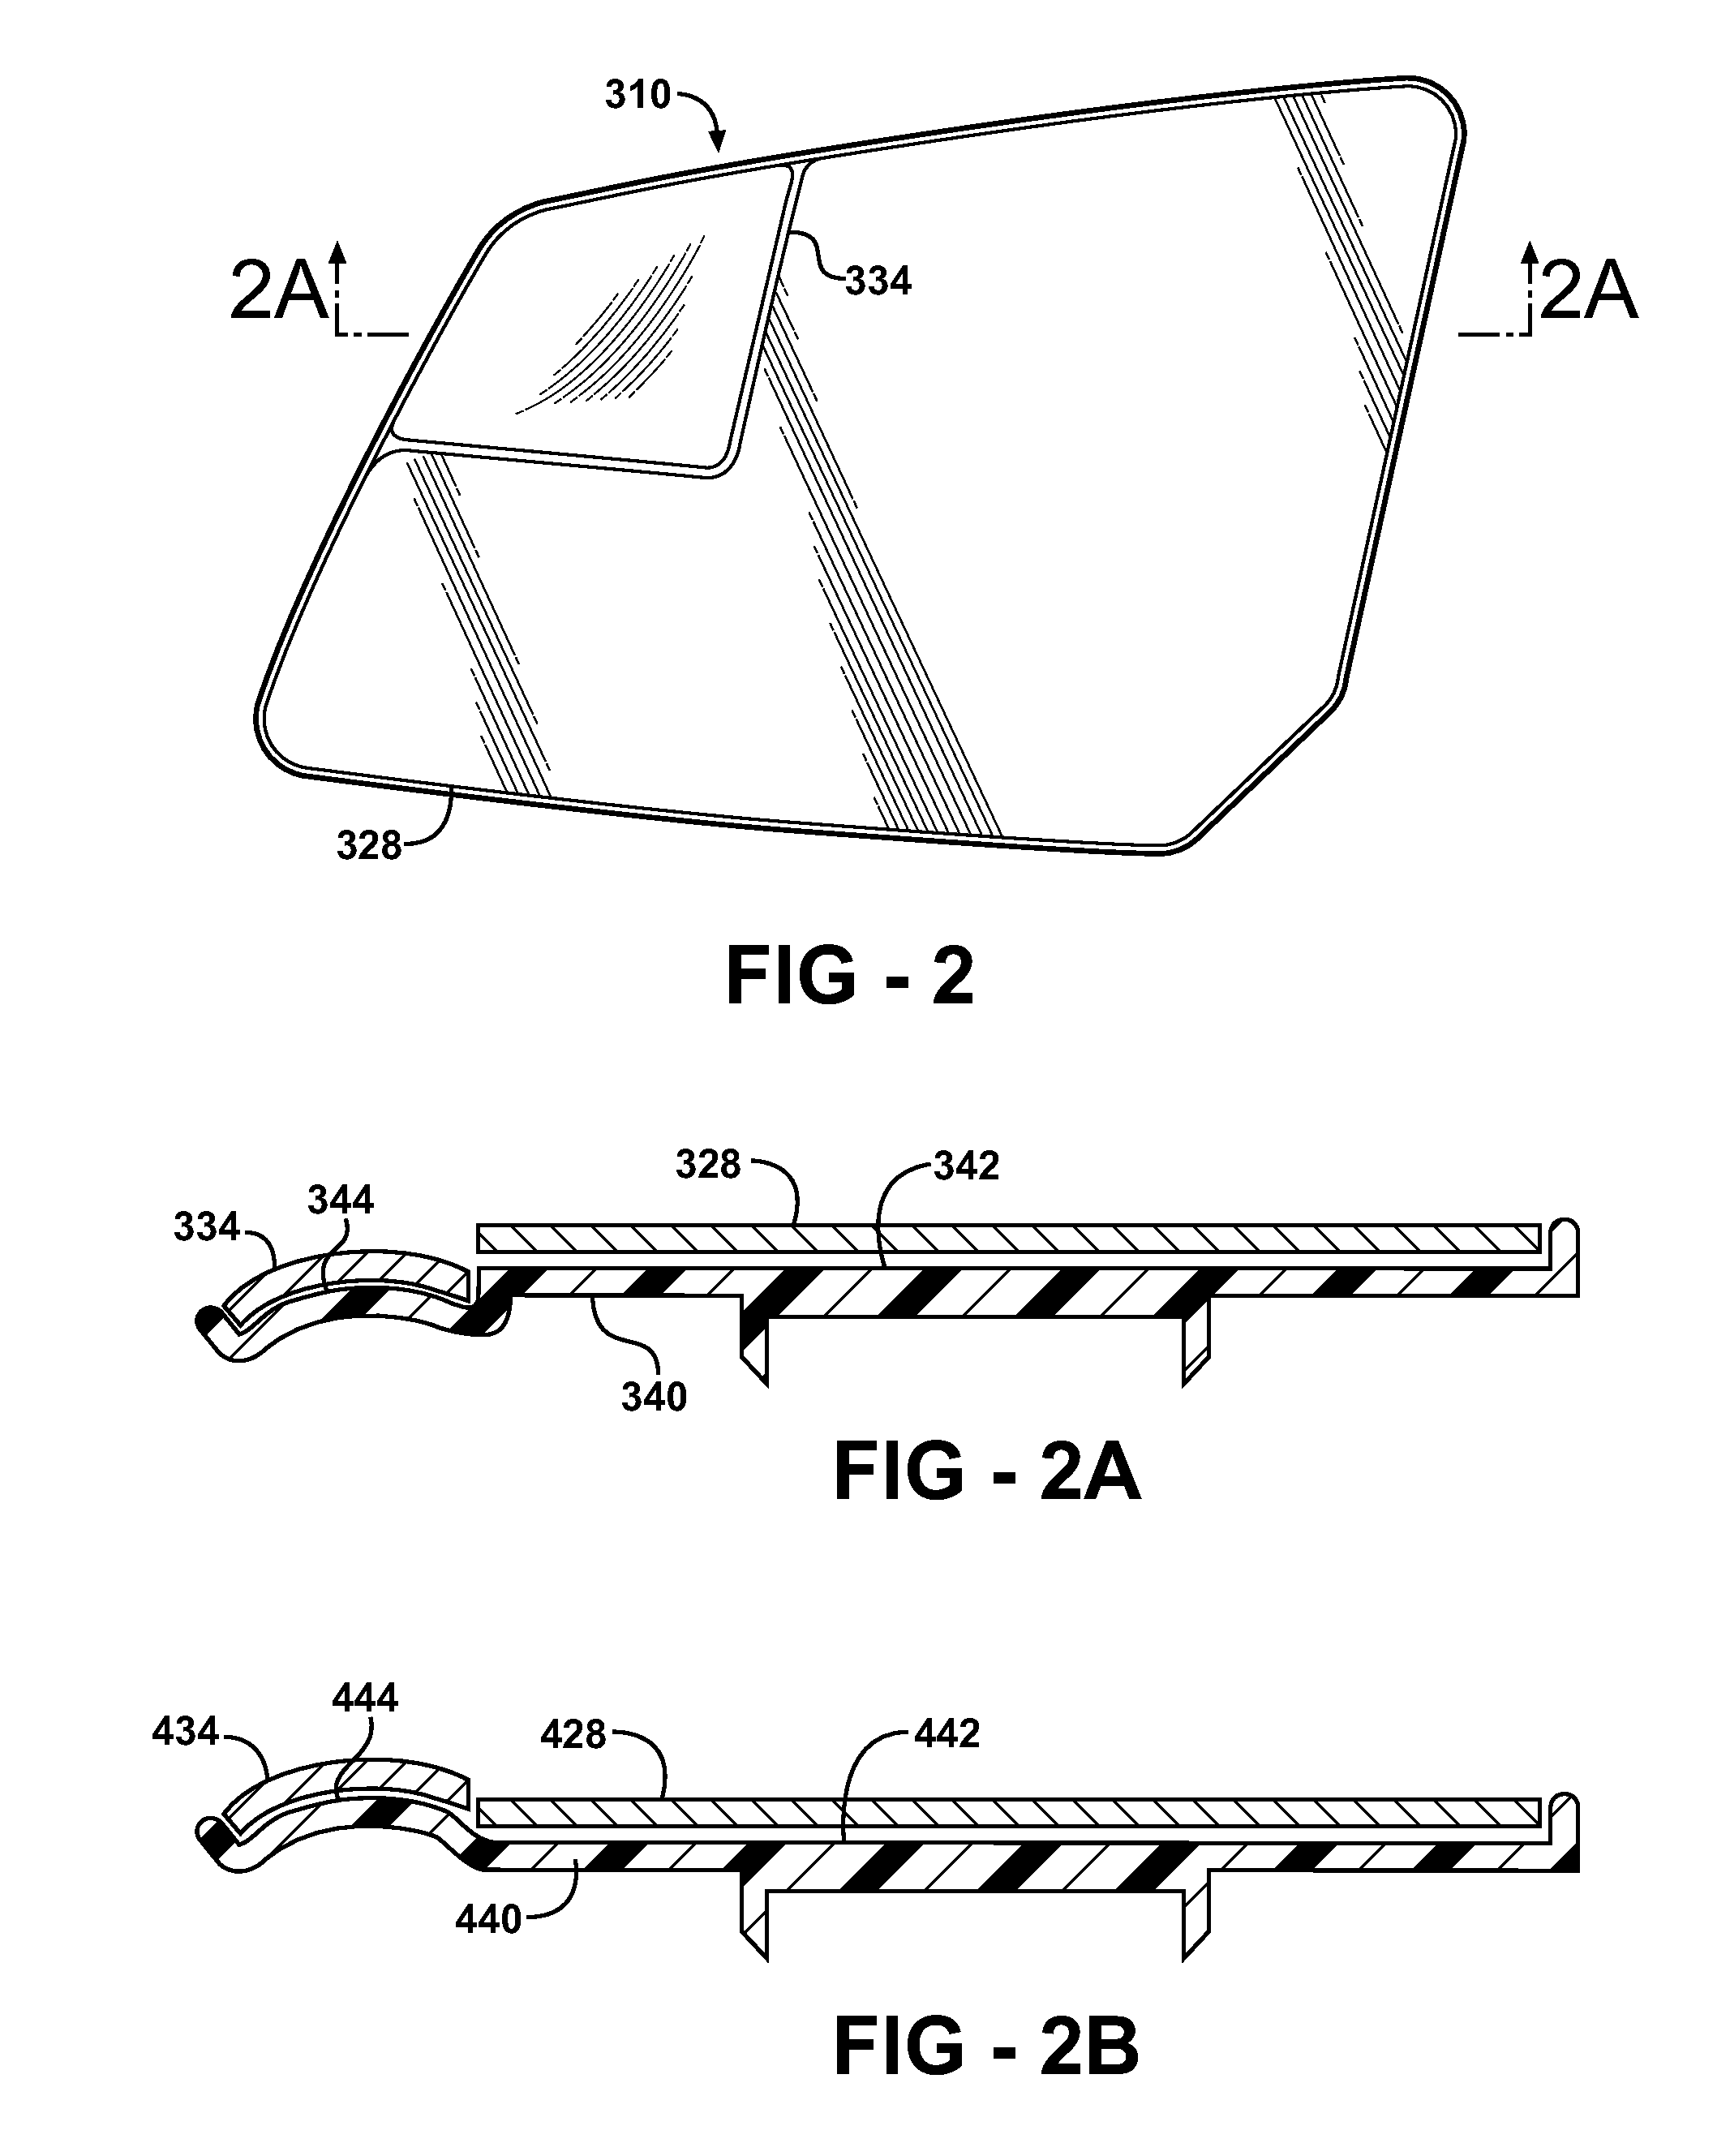 Exterior Rearview Mirror for Motor Vehicles